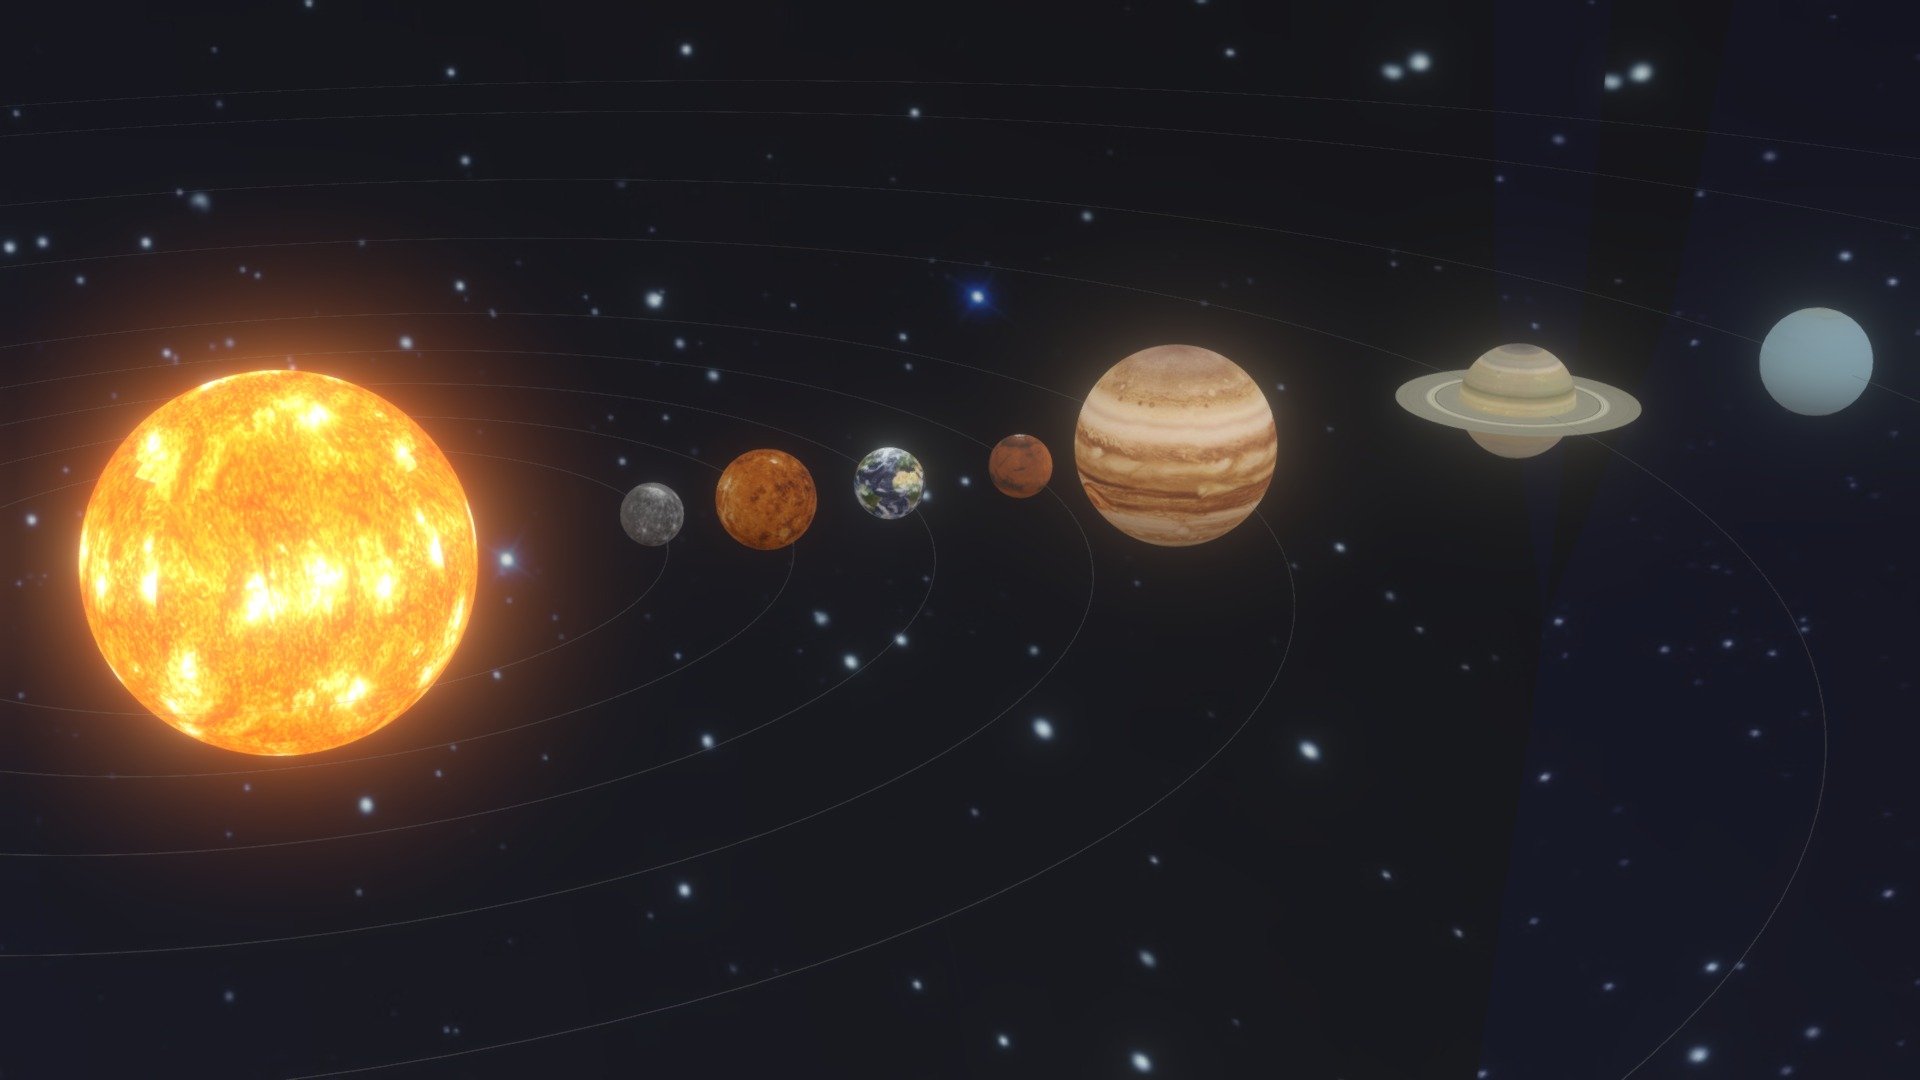 This Scene is set up for 3dsMax 2014 and above.

This is a graphic 3D representation and not accurate.

Each planet is animated orbiting the sun 3d model